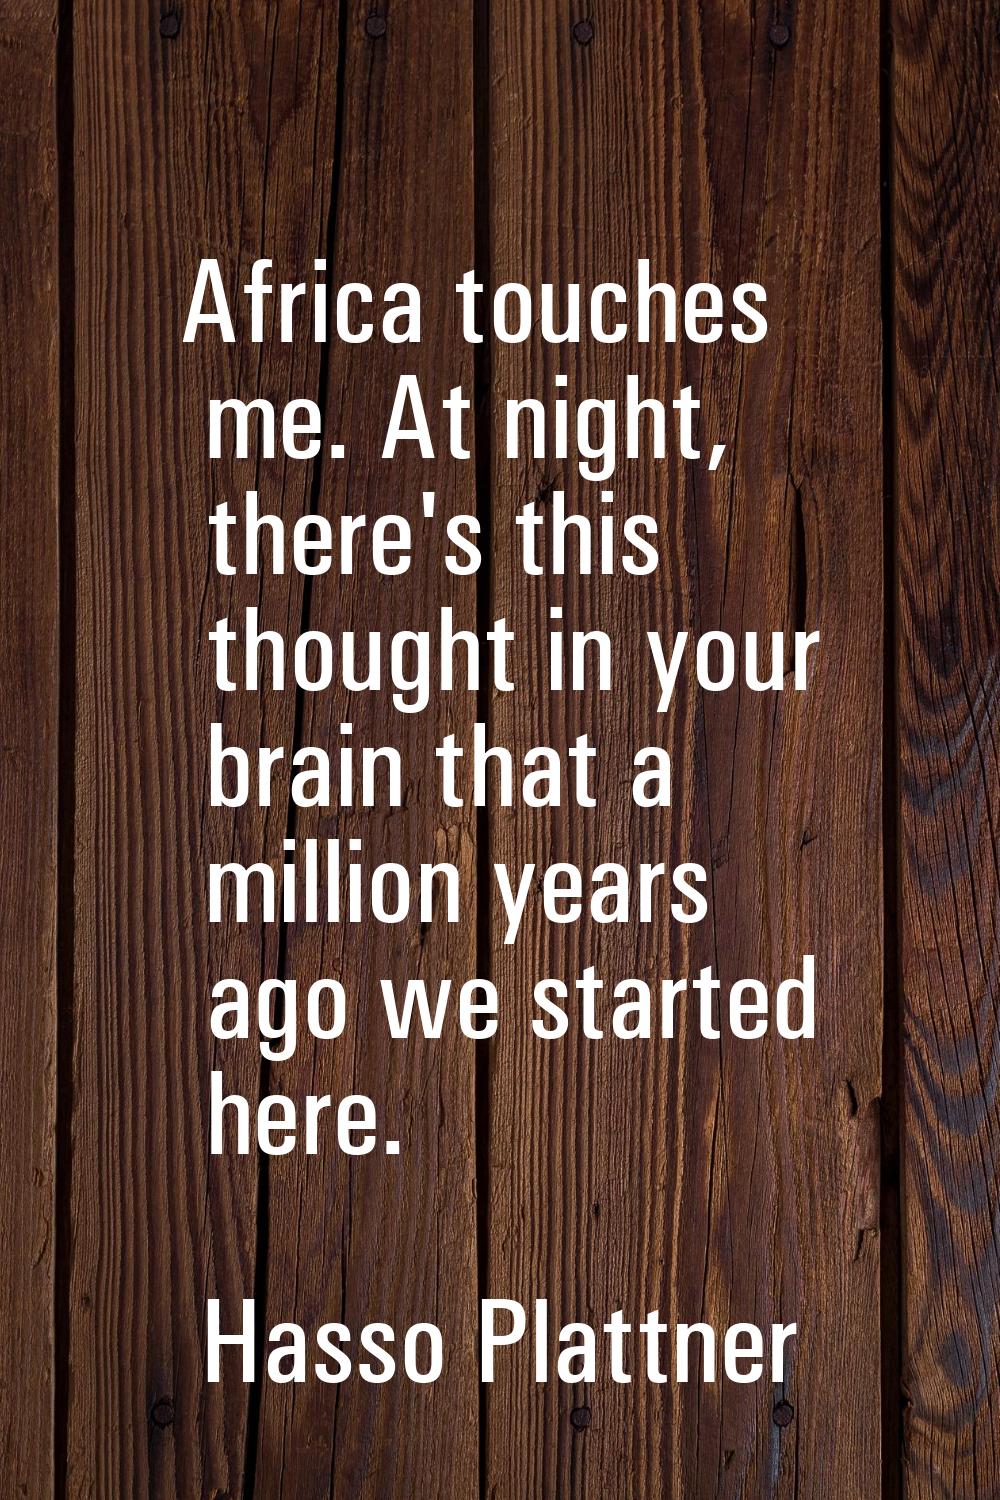 Africa touches me. At night, there's this thought in your brain that a million years ago we started